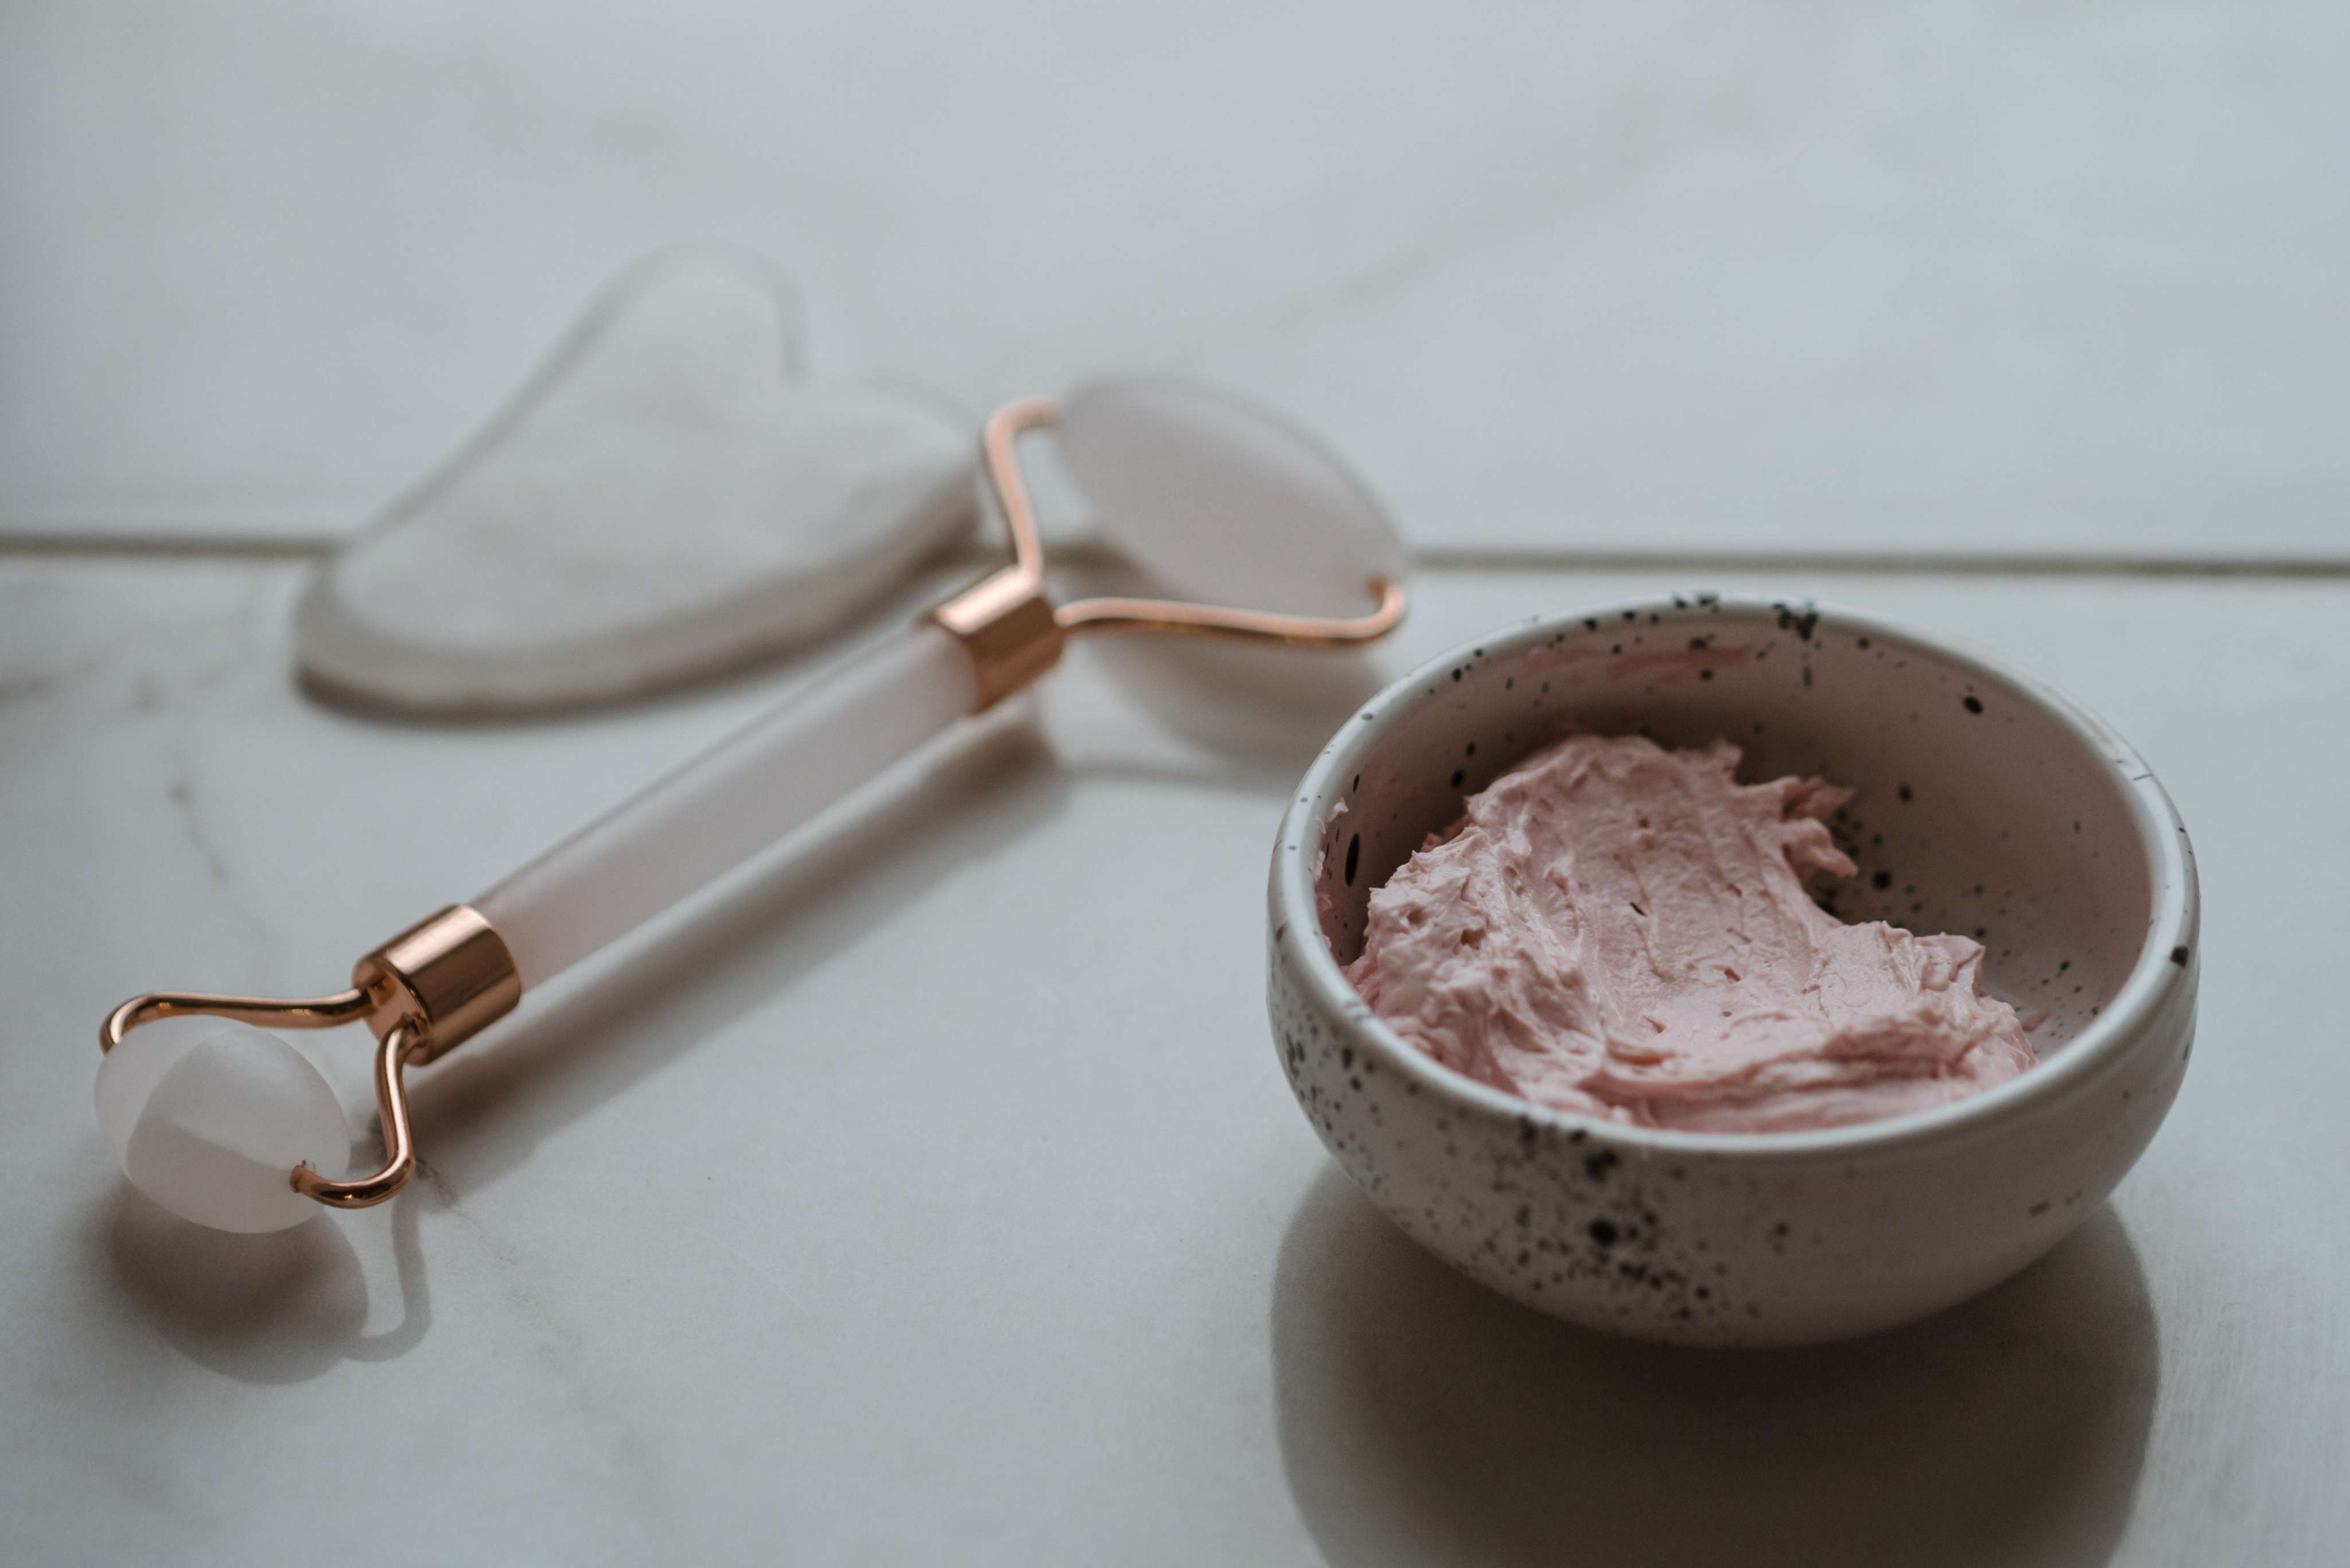 Facial Roller and Guasha with Pink Cream in Bowl for Facelift Exercises